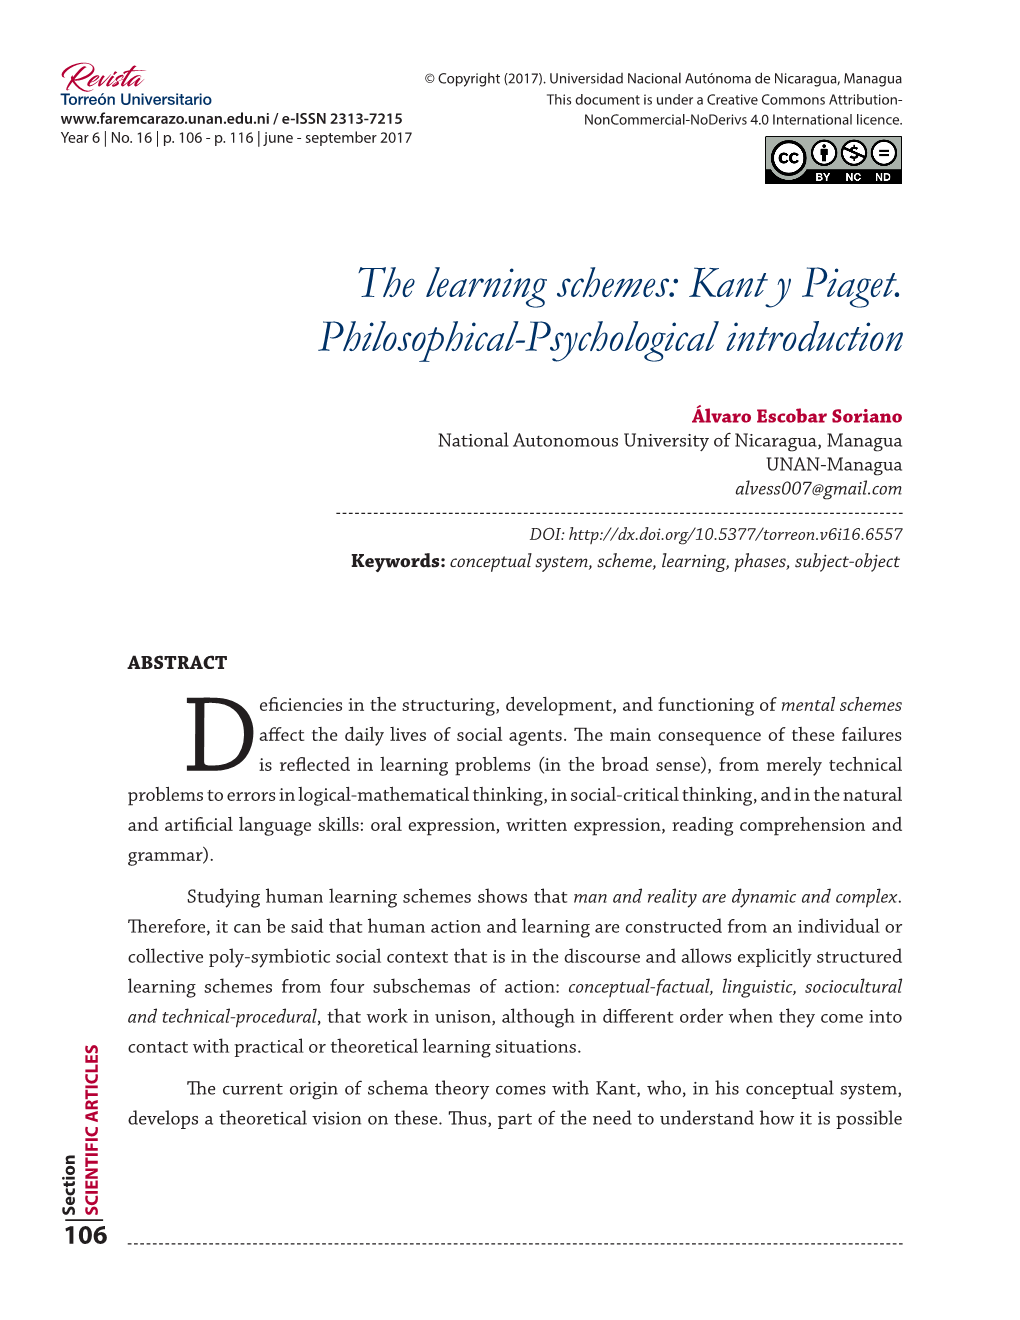 The Learning Schemes: Kant Y Piaget. Philosophical-Psychological Introduction